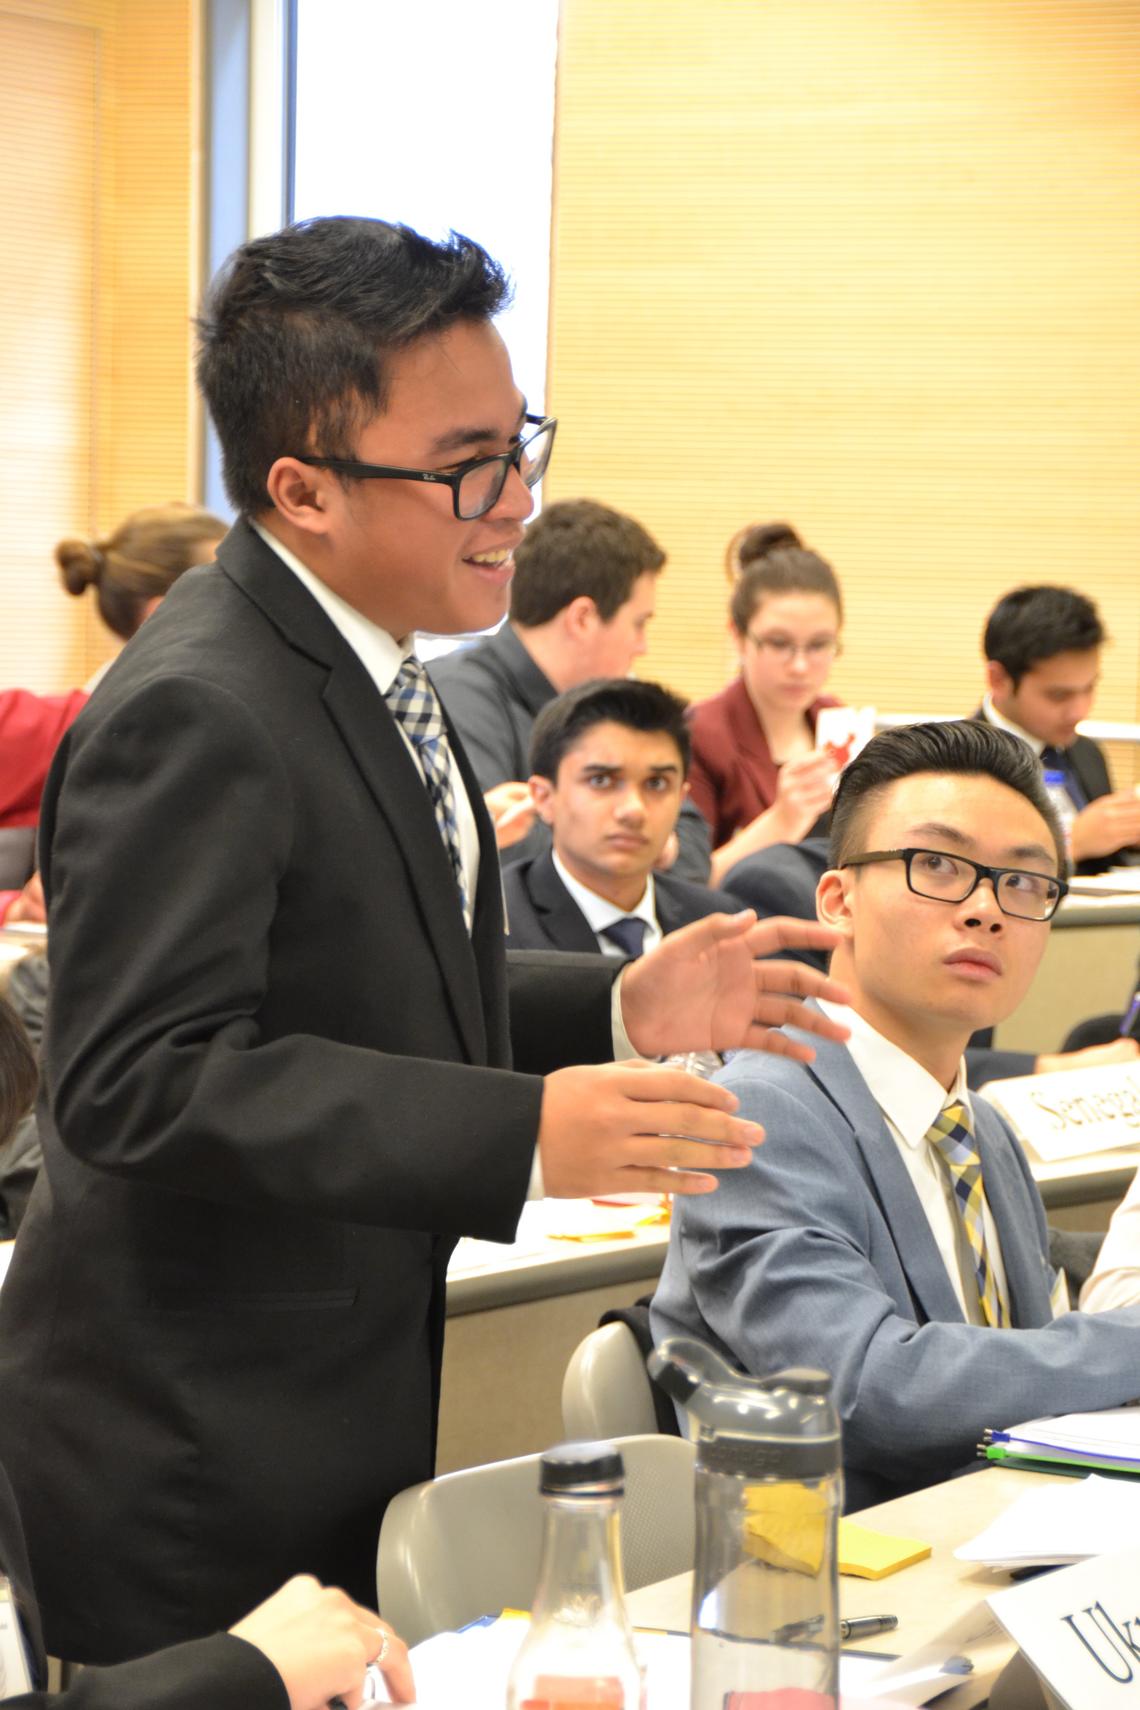 The university's model UN for high school students is the longest-standing conference and opportunity in Alberta for high school students to gain hands on experience regarding international policy and cooperation. 